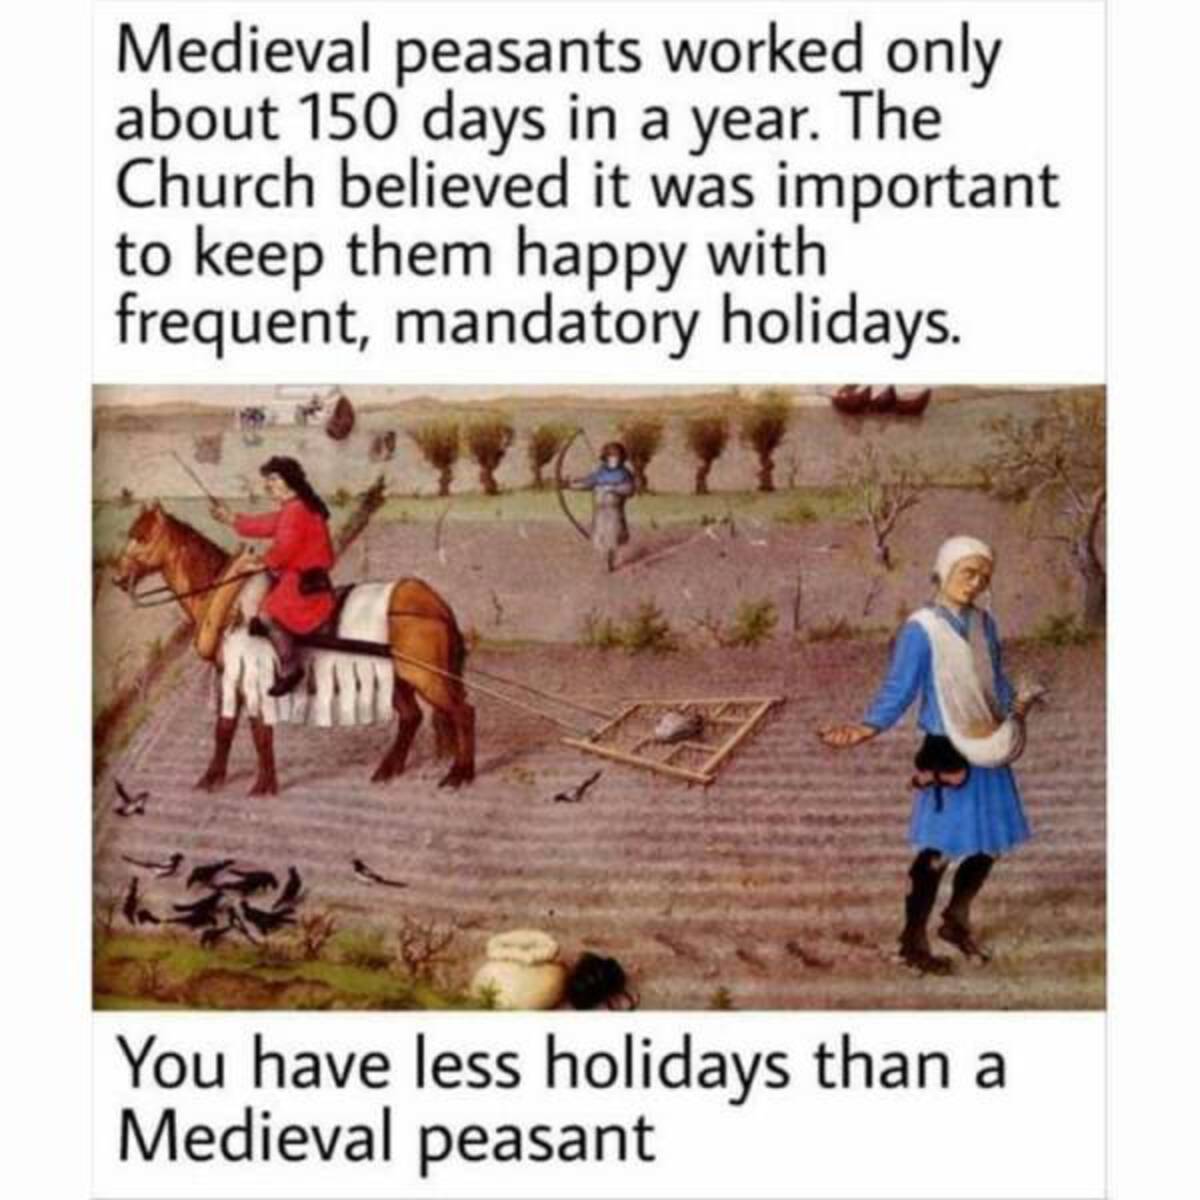 medieval peasant memes - Medieval peasants worked only about 150 days in a year. The Church believed it was important to keep them happy with frequent, mandatory holidays. You have less holidays than a Medieval peasant